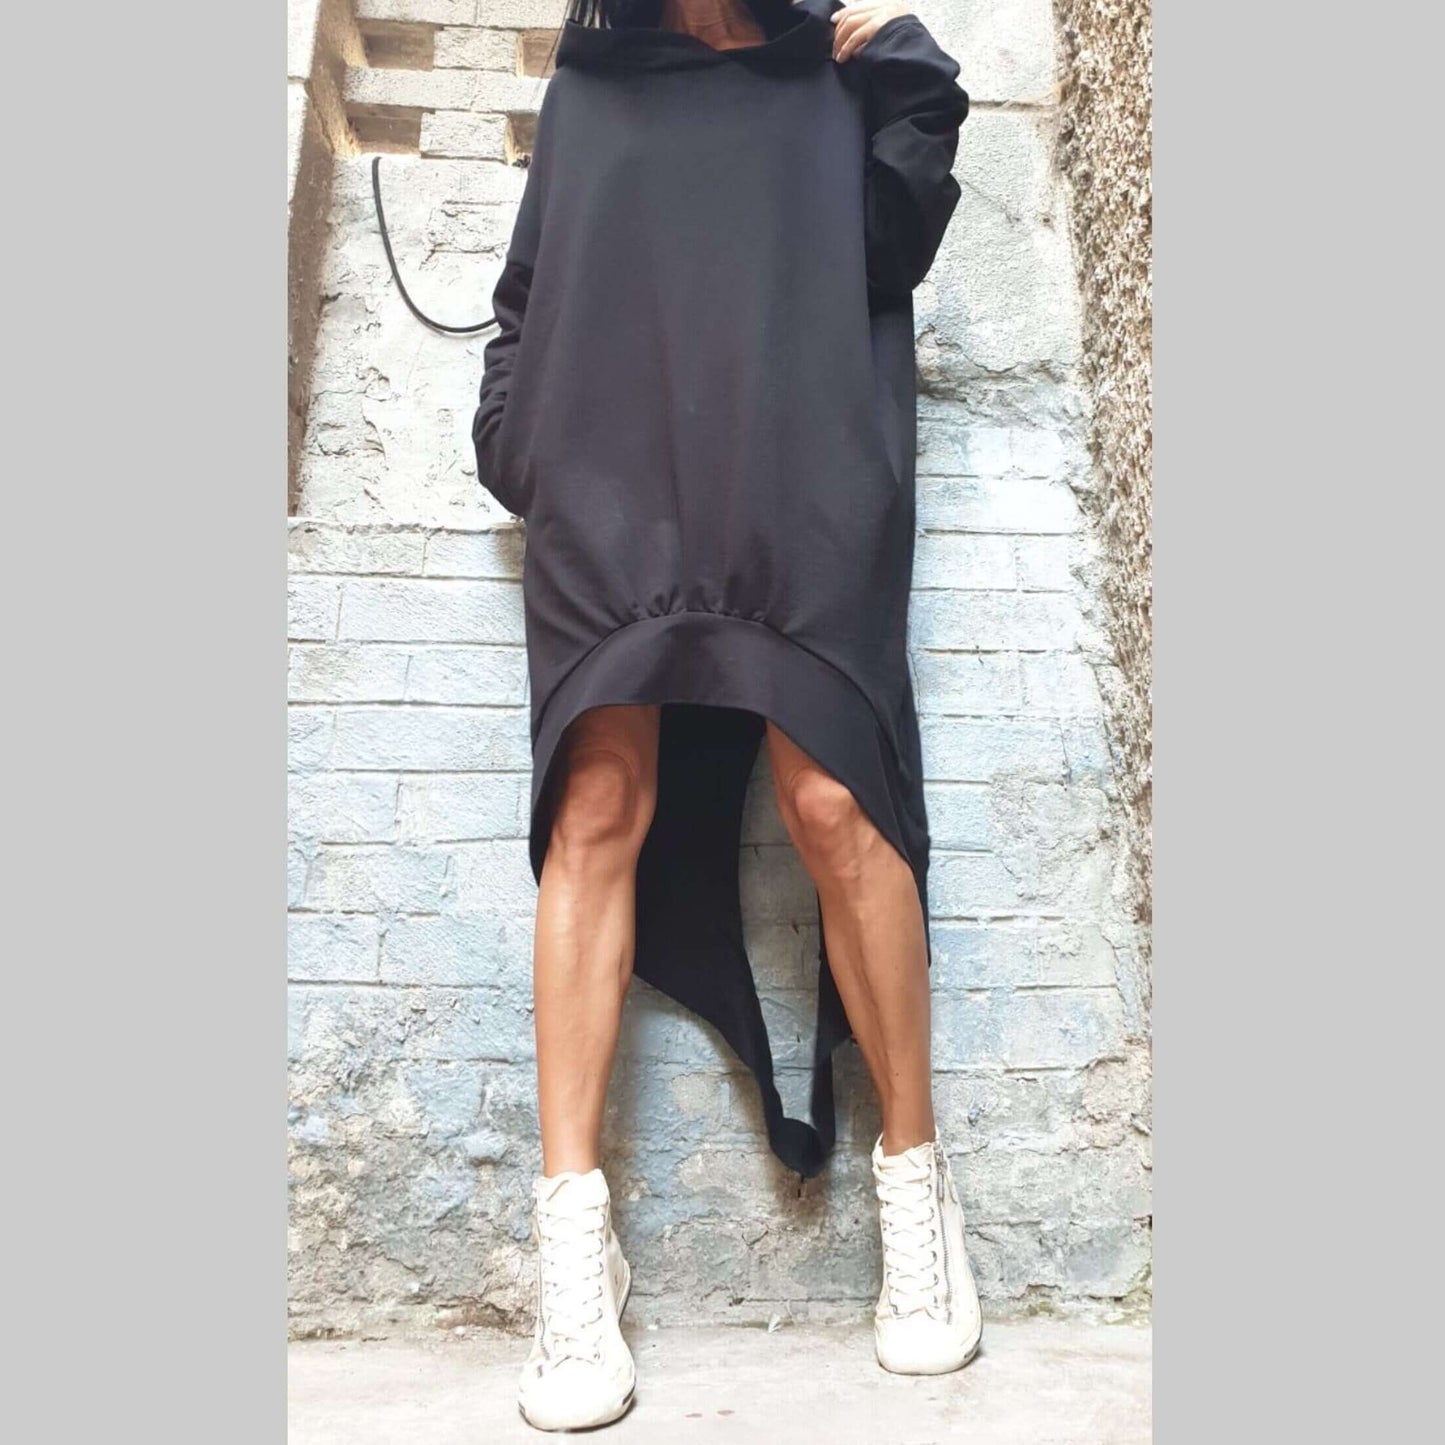 Extravagant Hooded Tunic - Handmade clothing from AngelBySilvia - Top Designer Brands 